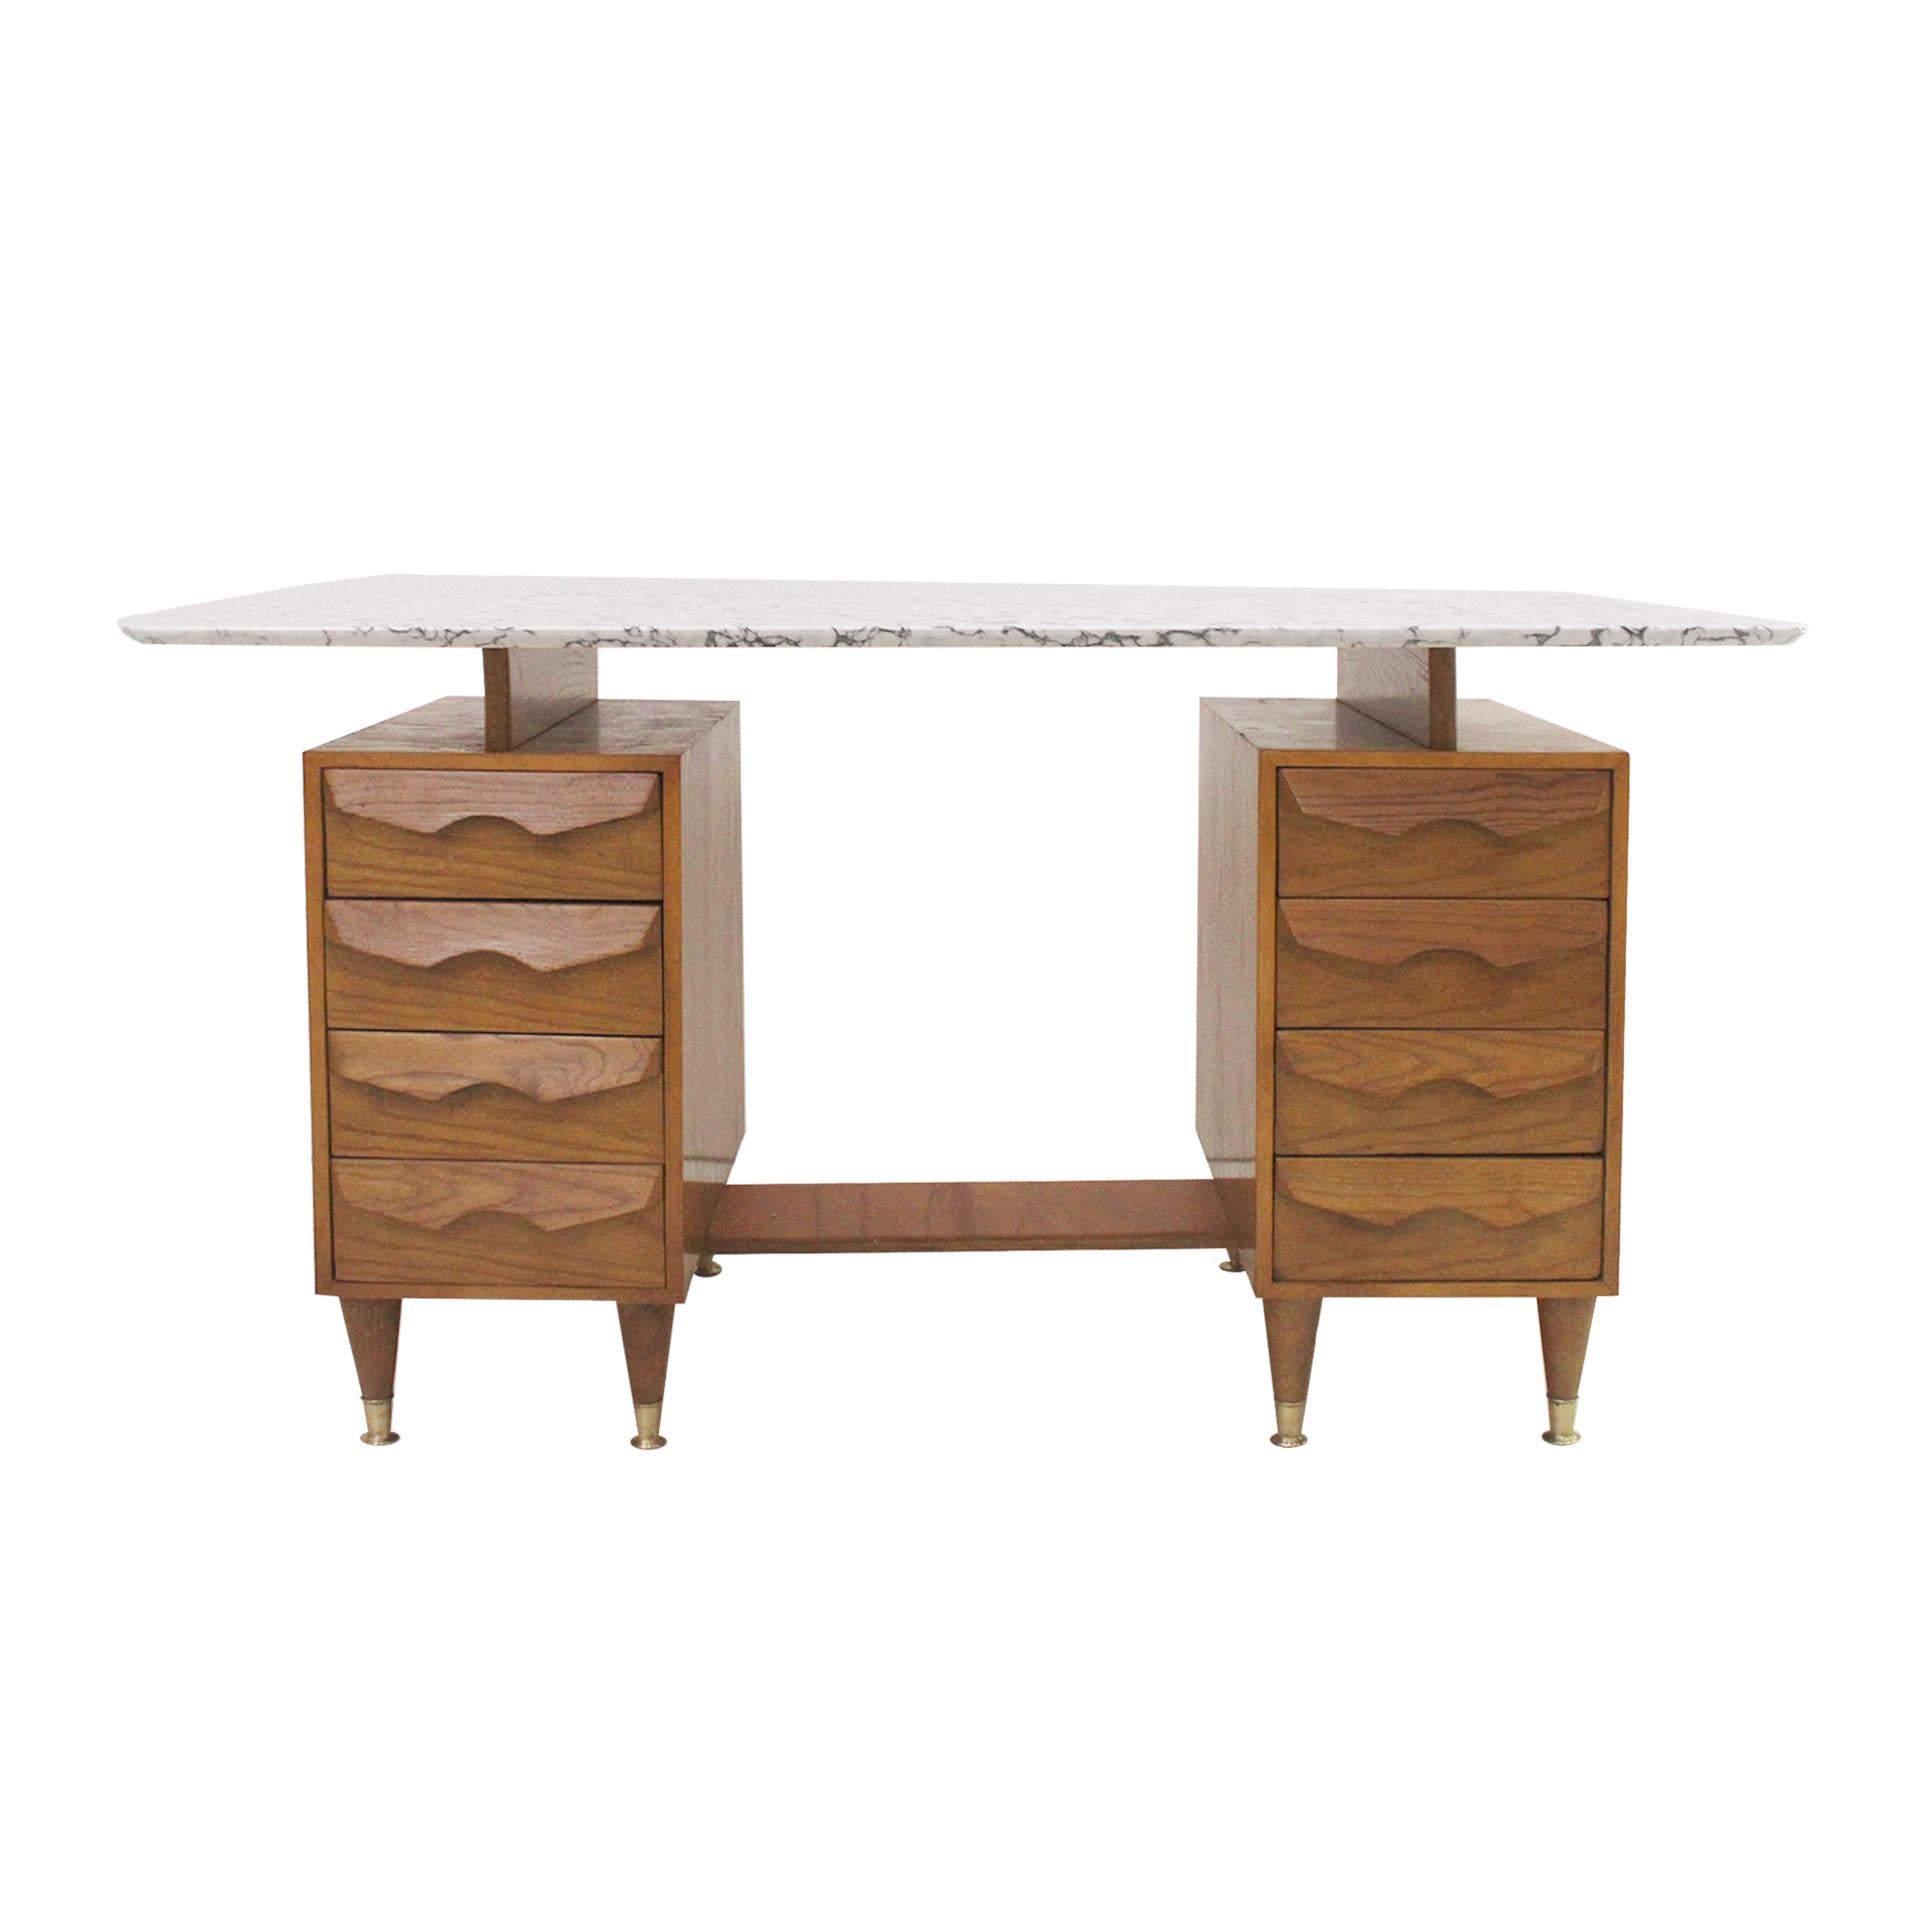 American oak and birch desk composed of two bodies with four drawers each. Portuguese pink marble on top. Conical legs with brass details.

Every item LA Studio offers is checked by our team of 10 craftsmen in our in-house workshop. Special